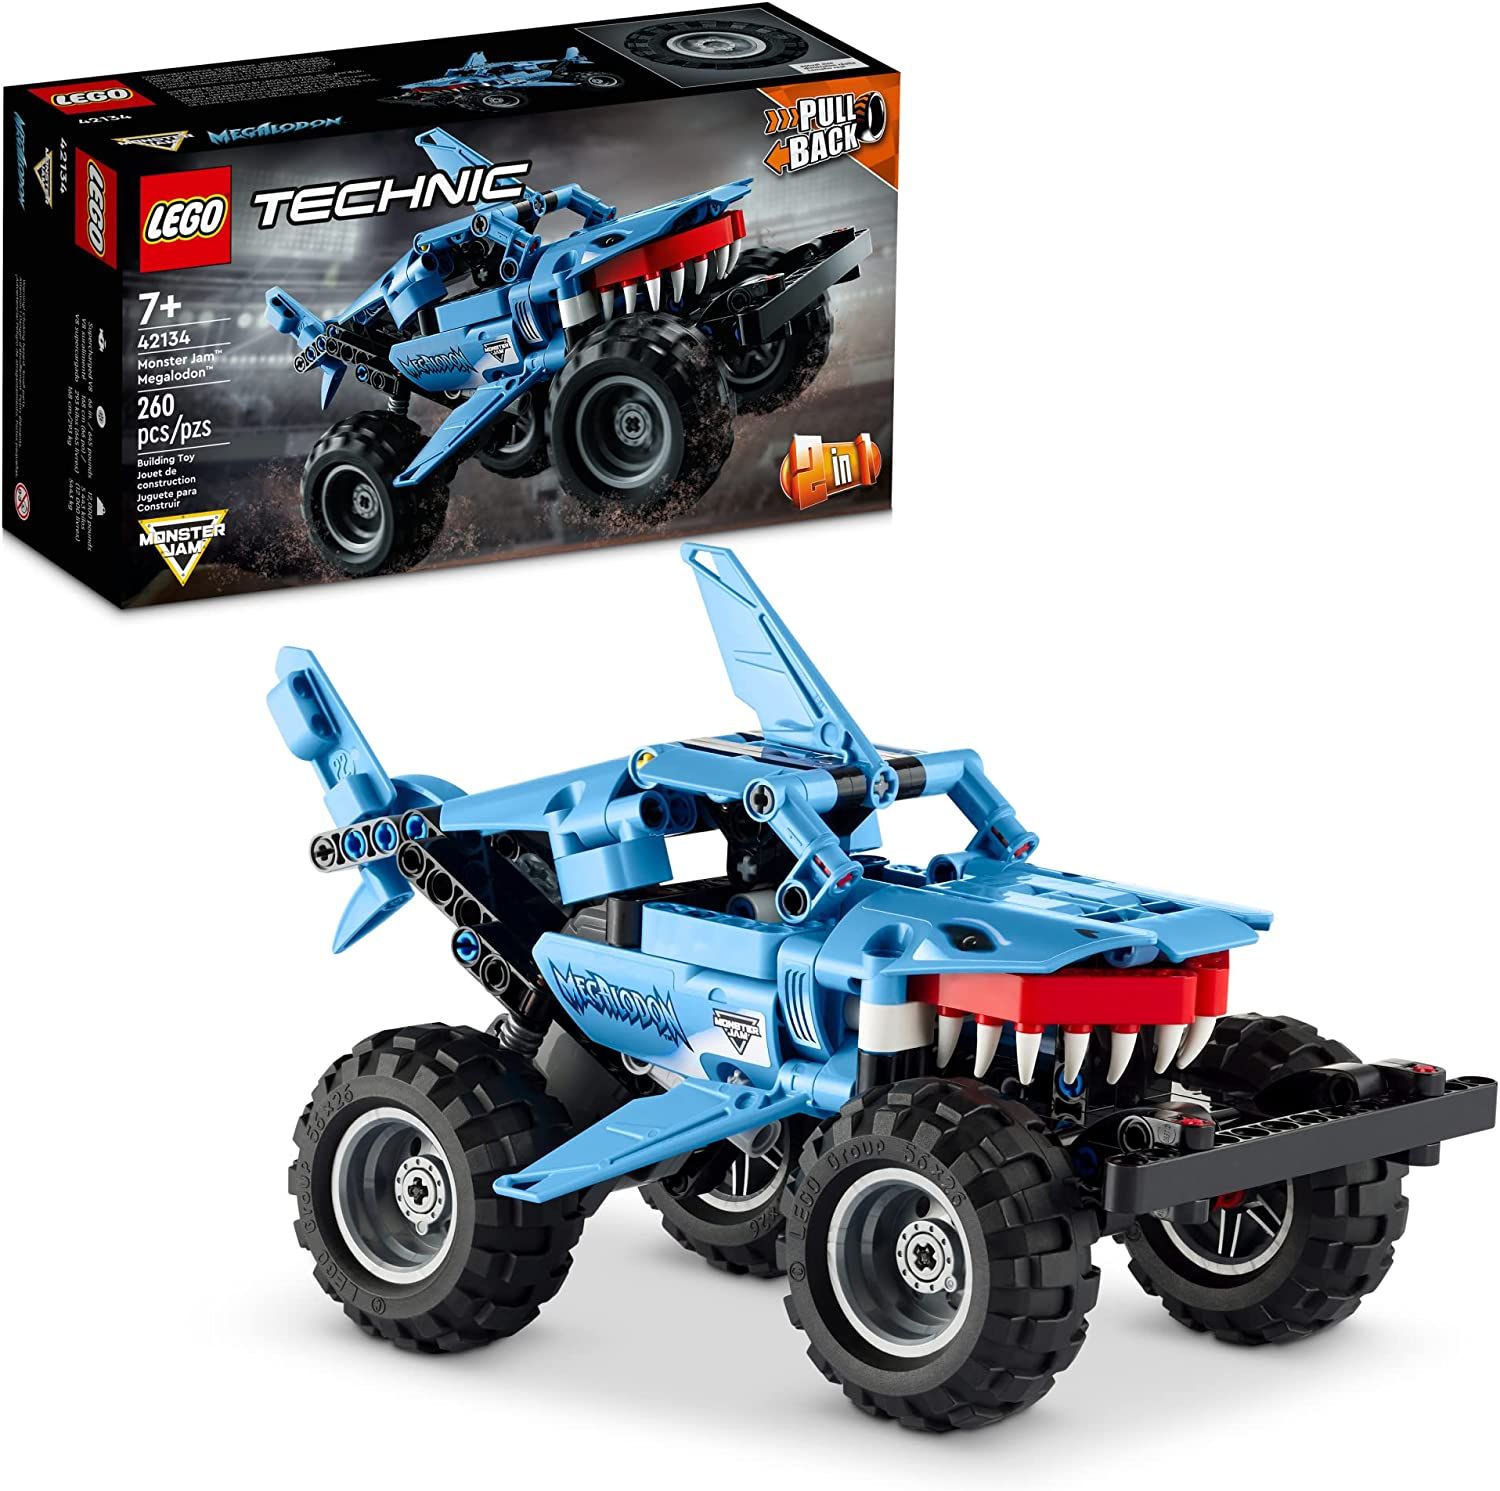 LEGO Technic Monster Jam Megalodon 42134 Building Toy Set for Kids, Boys, and Girls Ages 7+ (260 Pieces) 1